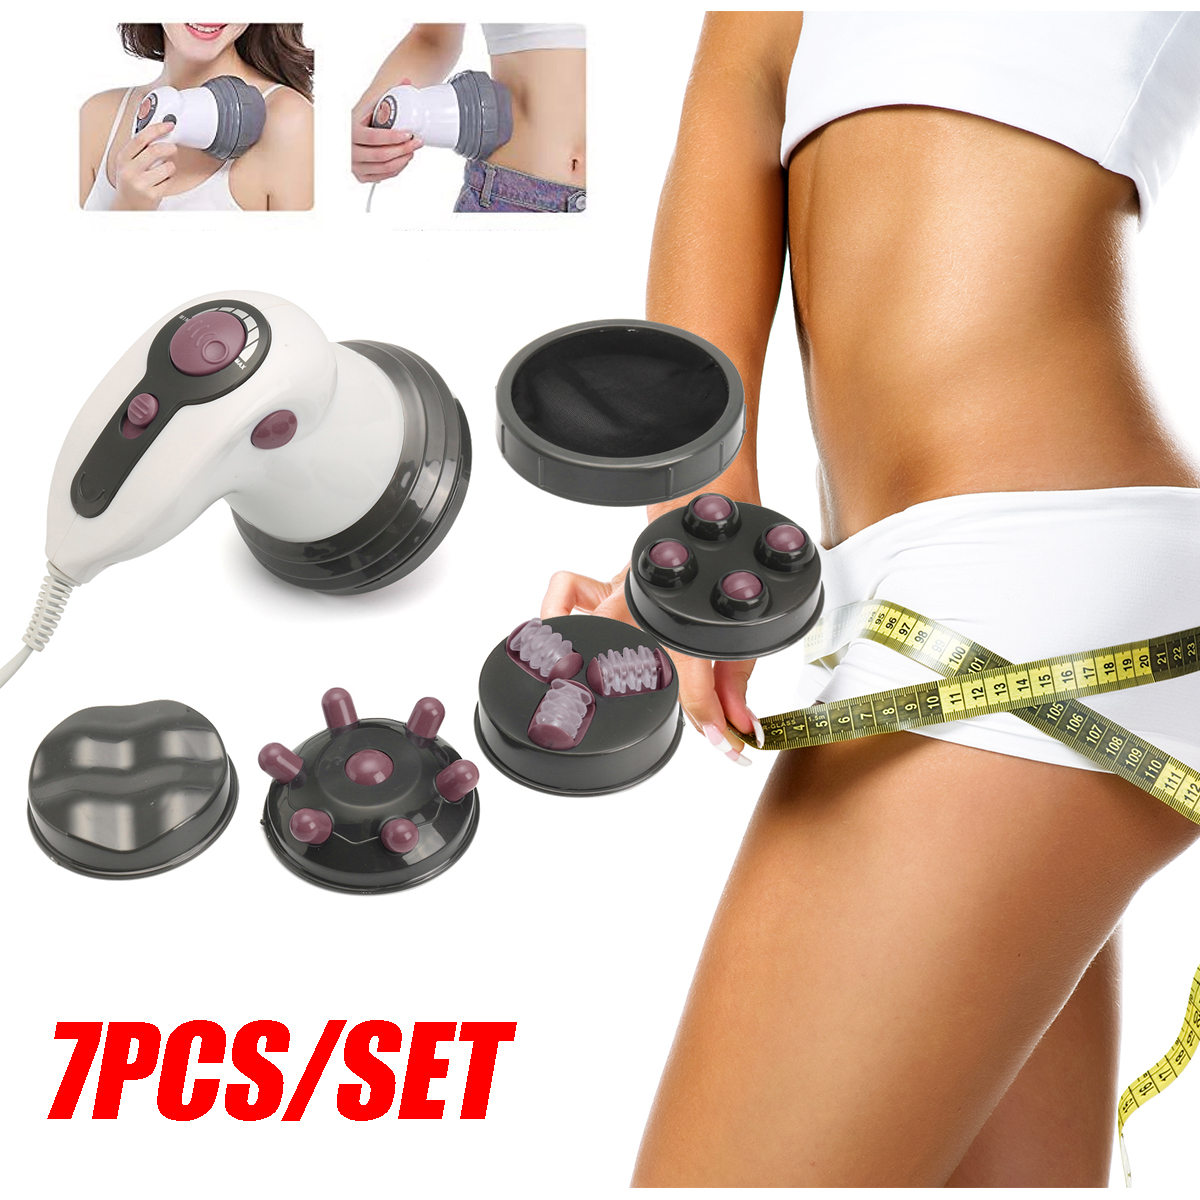 7pcs-Infrared-Electric-Full-Body-Massager-Slimming-Equipment-Anti-cellulite-Machine-With-4-Heads-1676209-2